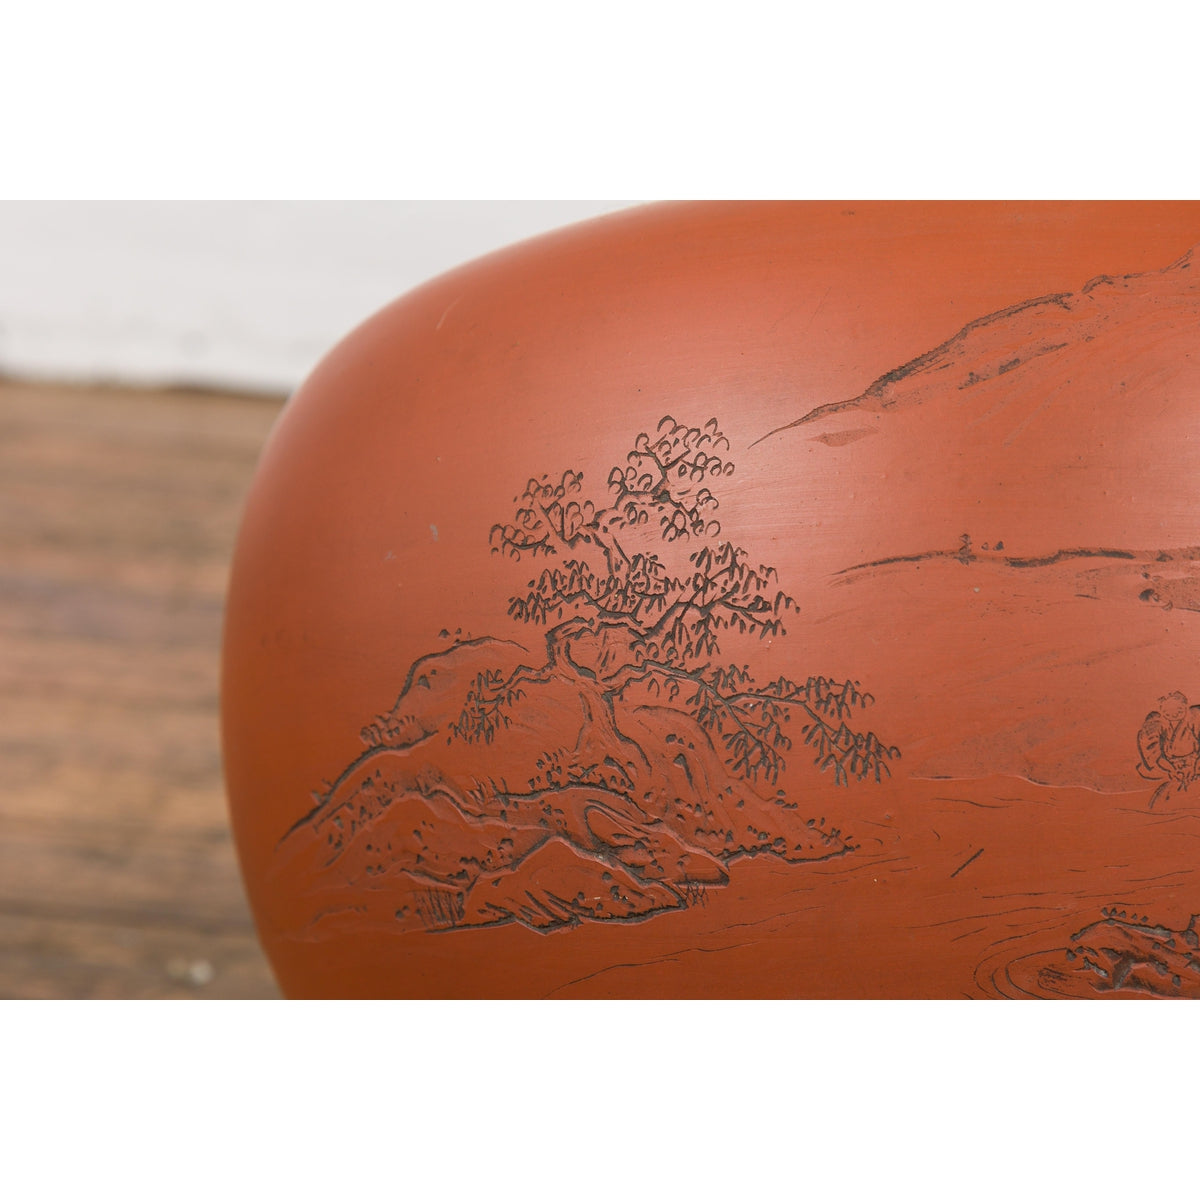 Orange Circular Antique Planter with Etched Design-YN7819-14. Asian & Chinese Furniture, Art, Antiques, Vintage Home Décor for sale at FEA Home